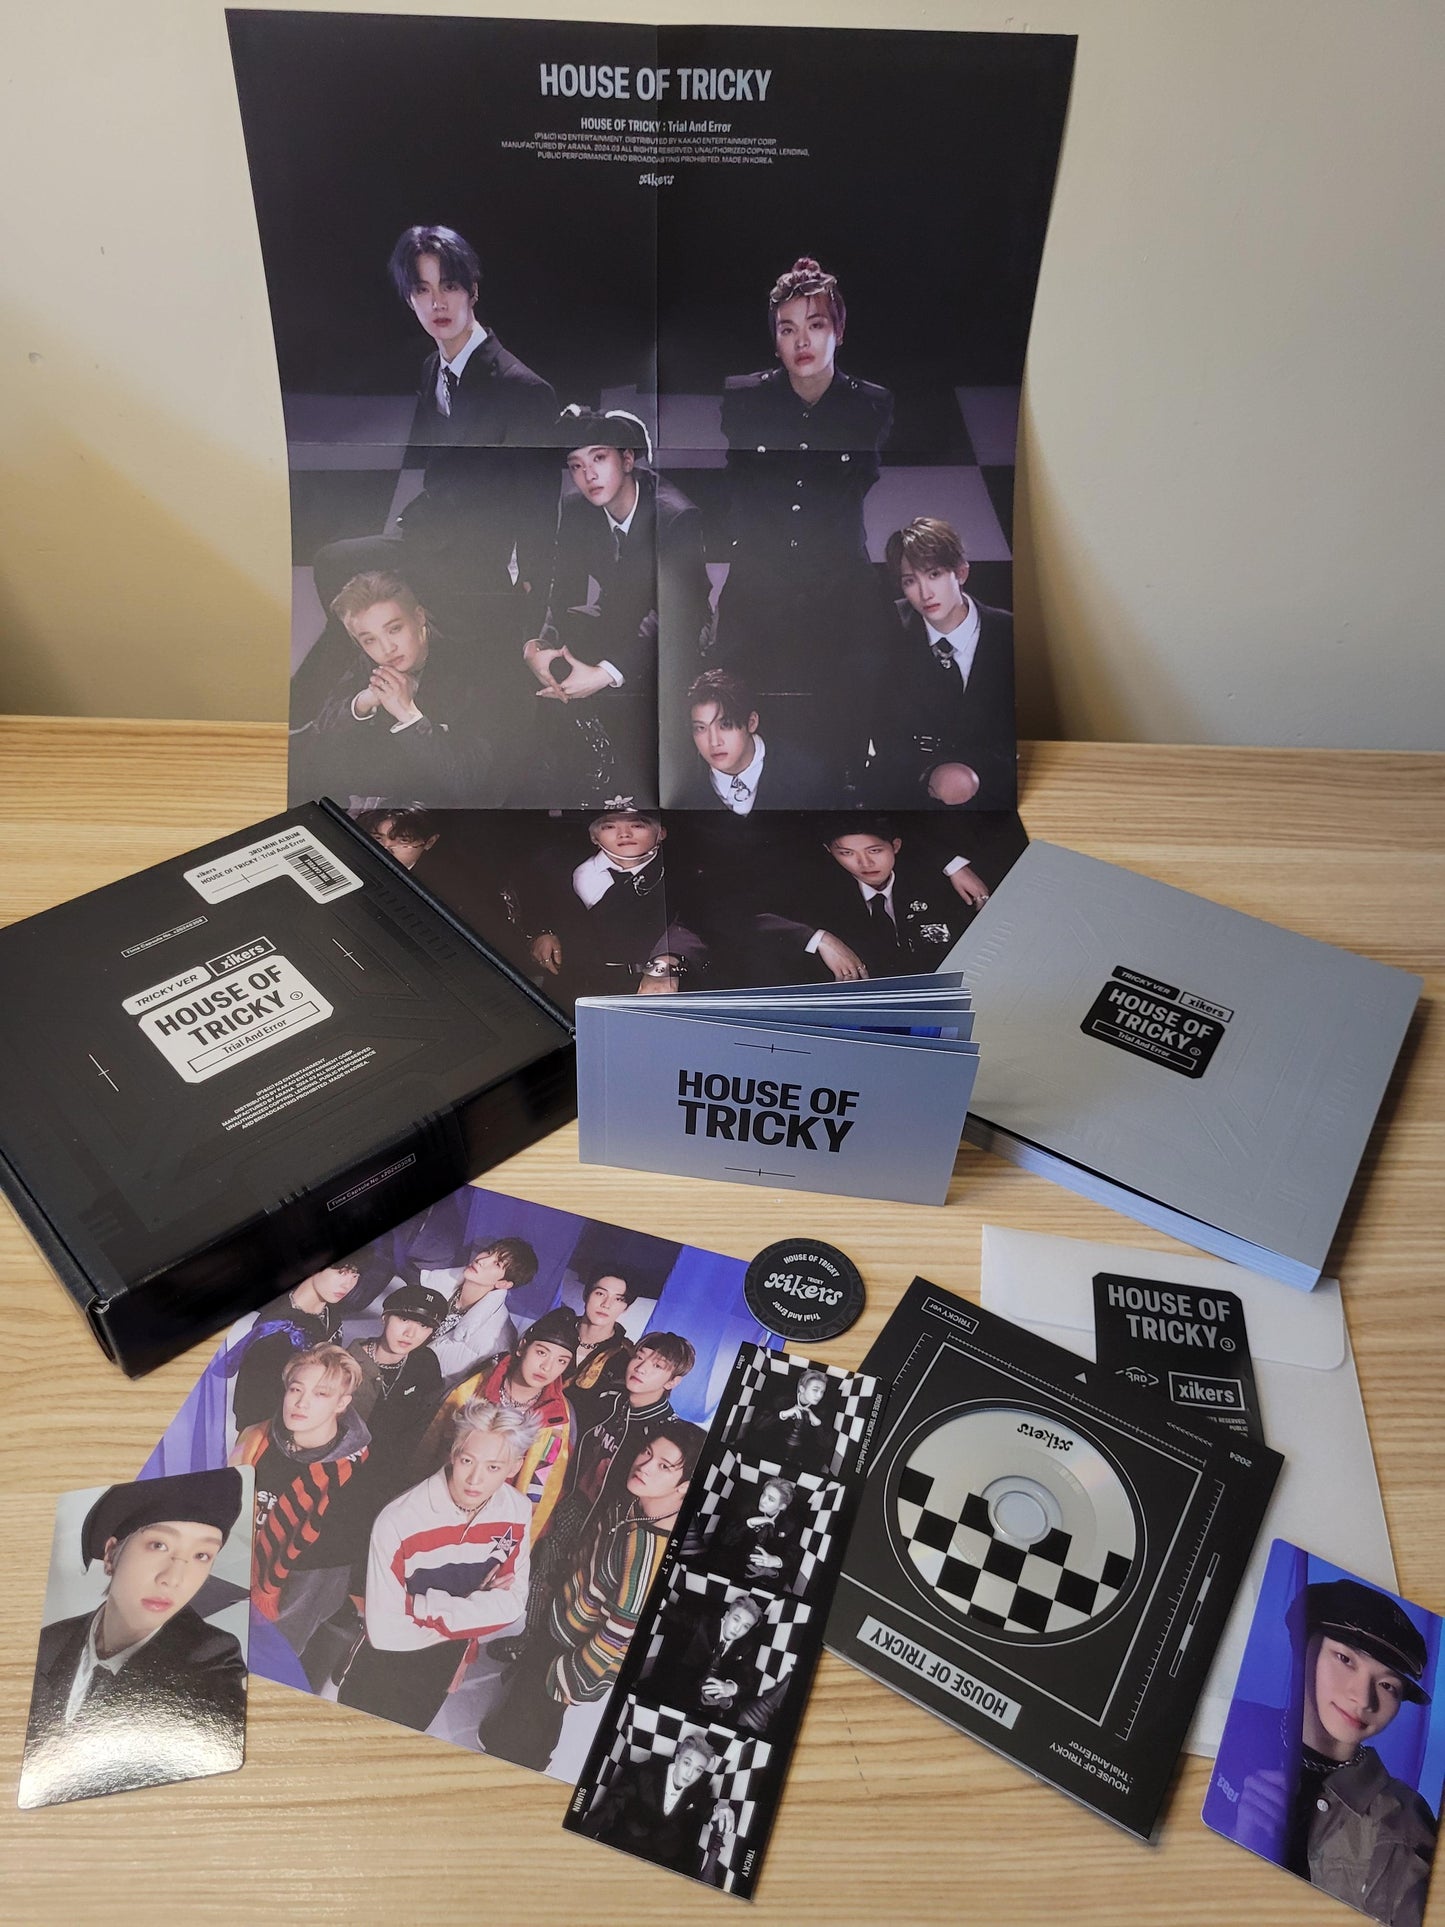 [UNBOXING] XIKERS - [HOUSE OF TRICKY : TRIAL AND ERROR] (TRICKER Vers.) - KAEPJJANG SHOP (캡짱 숍)